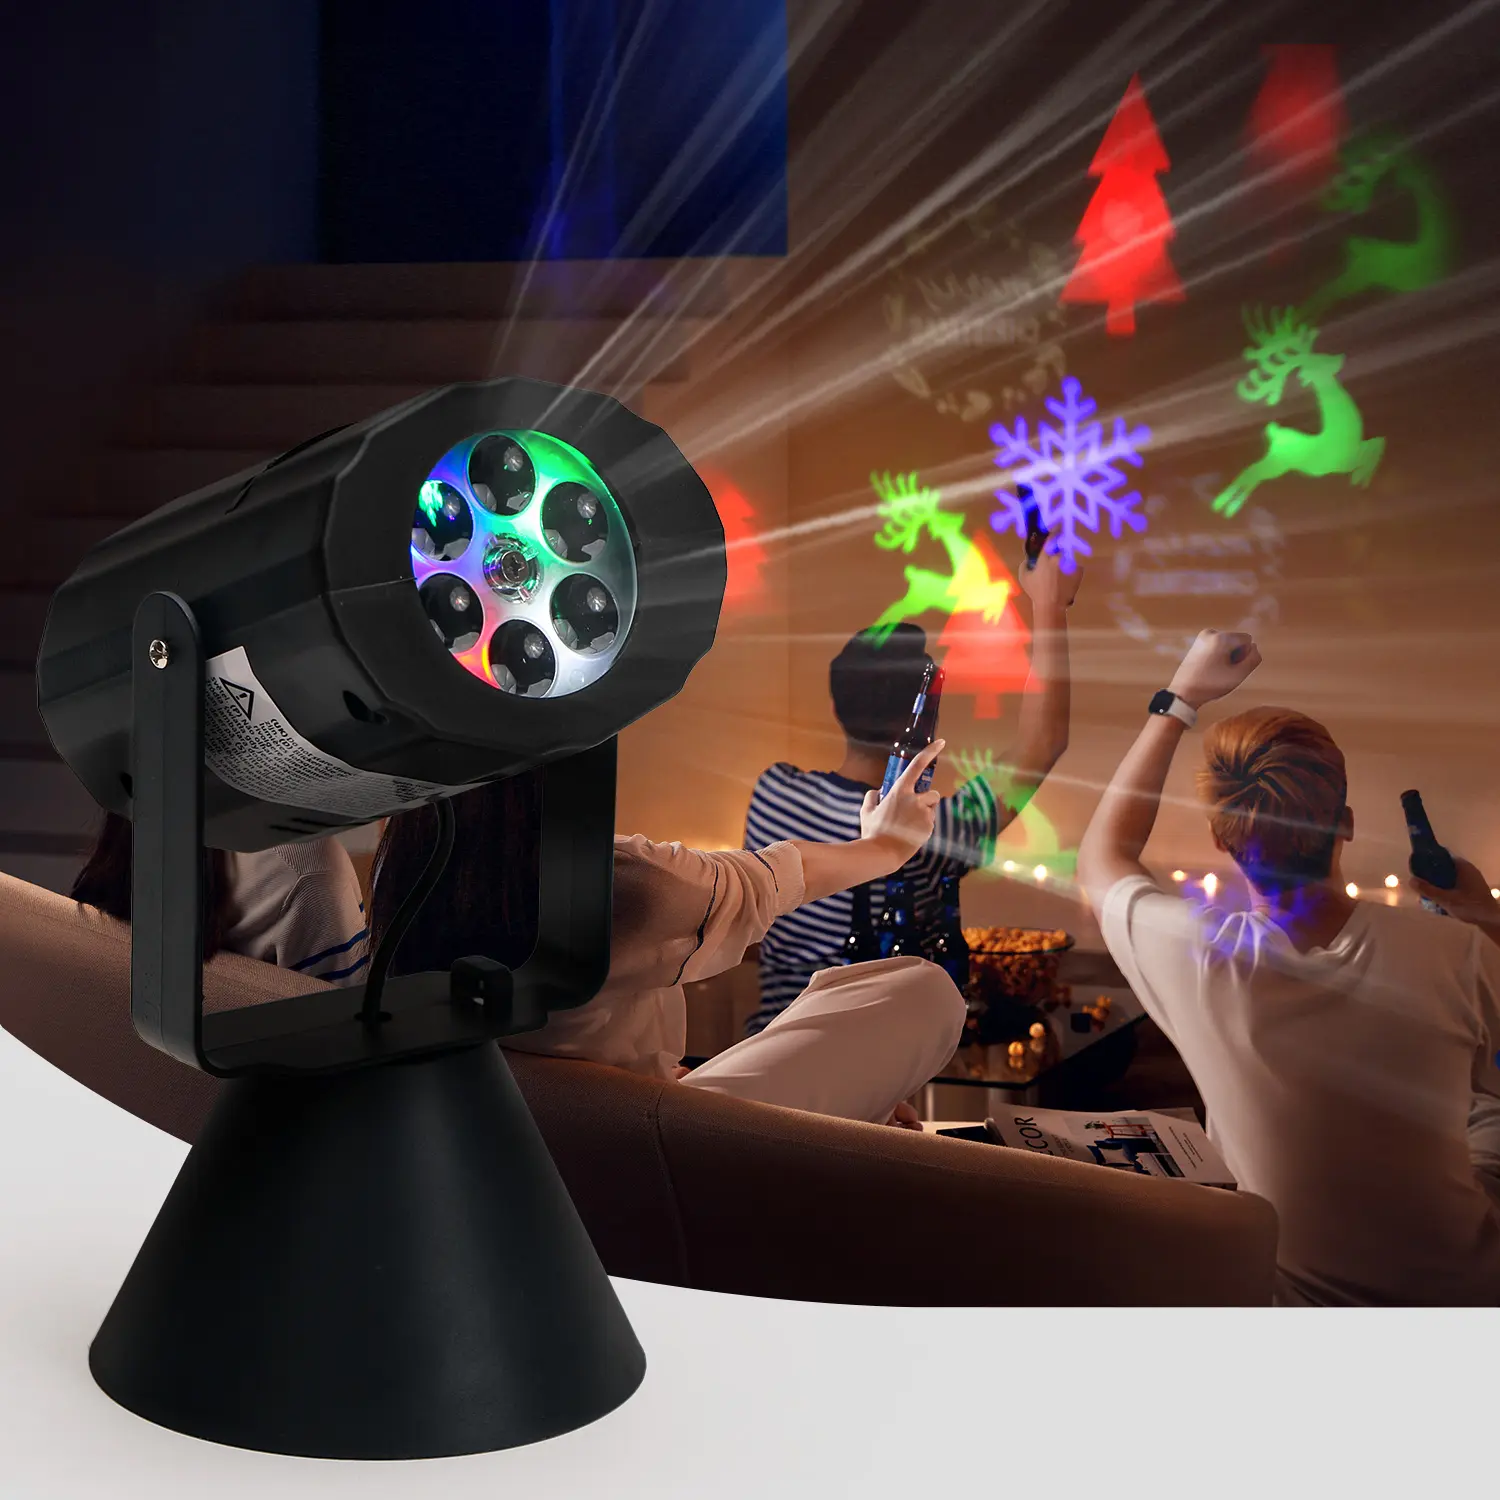 KSWING Hot Selling Indoor Lamp Use LED Light Projector Holiday Decoration Led Lights With Remote Control